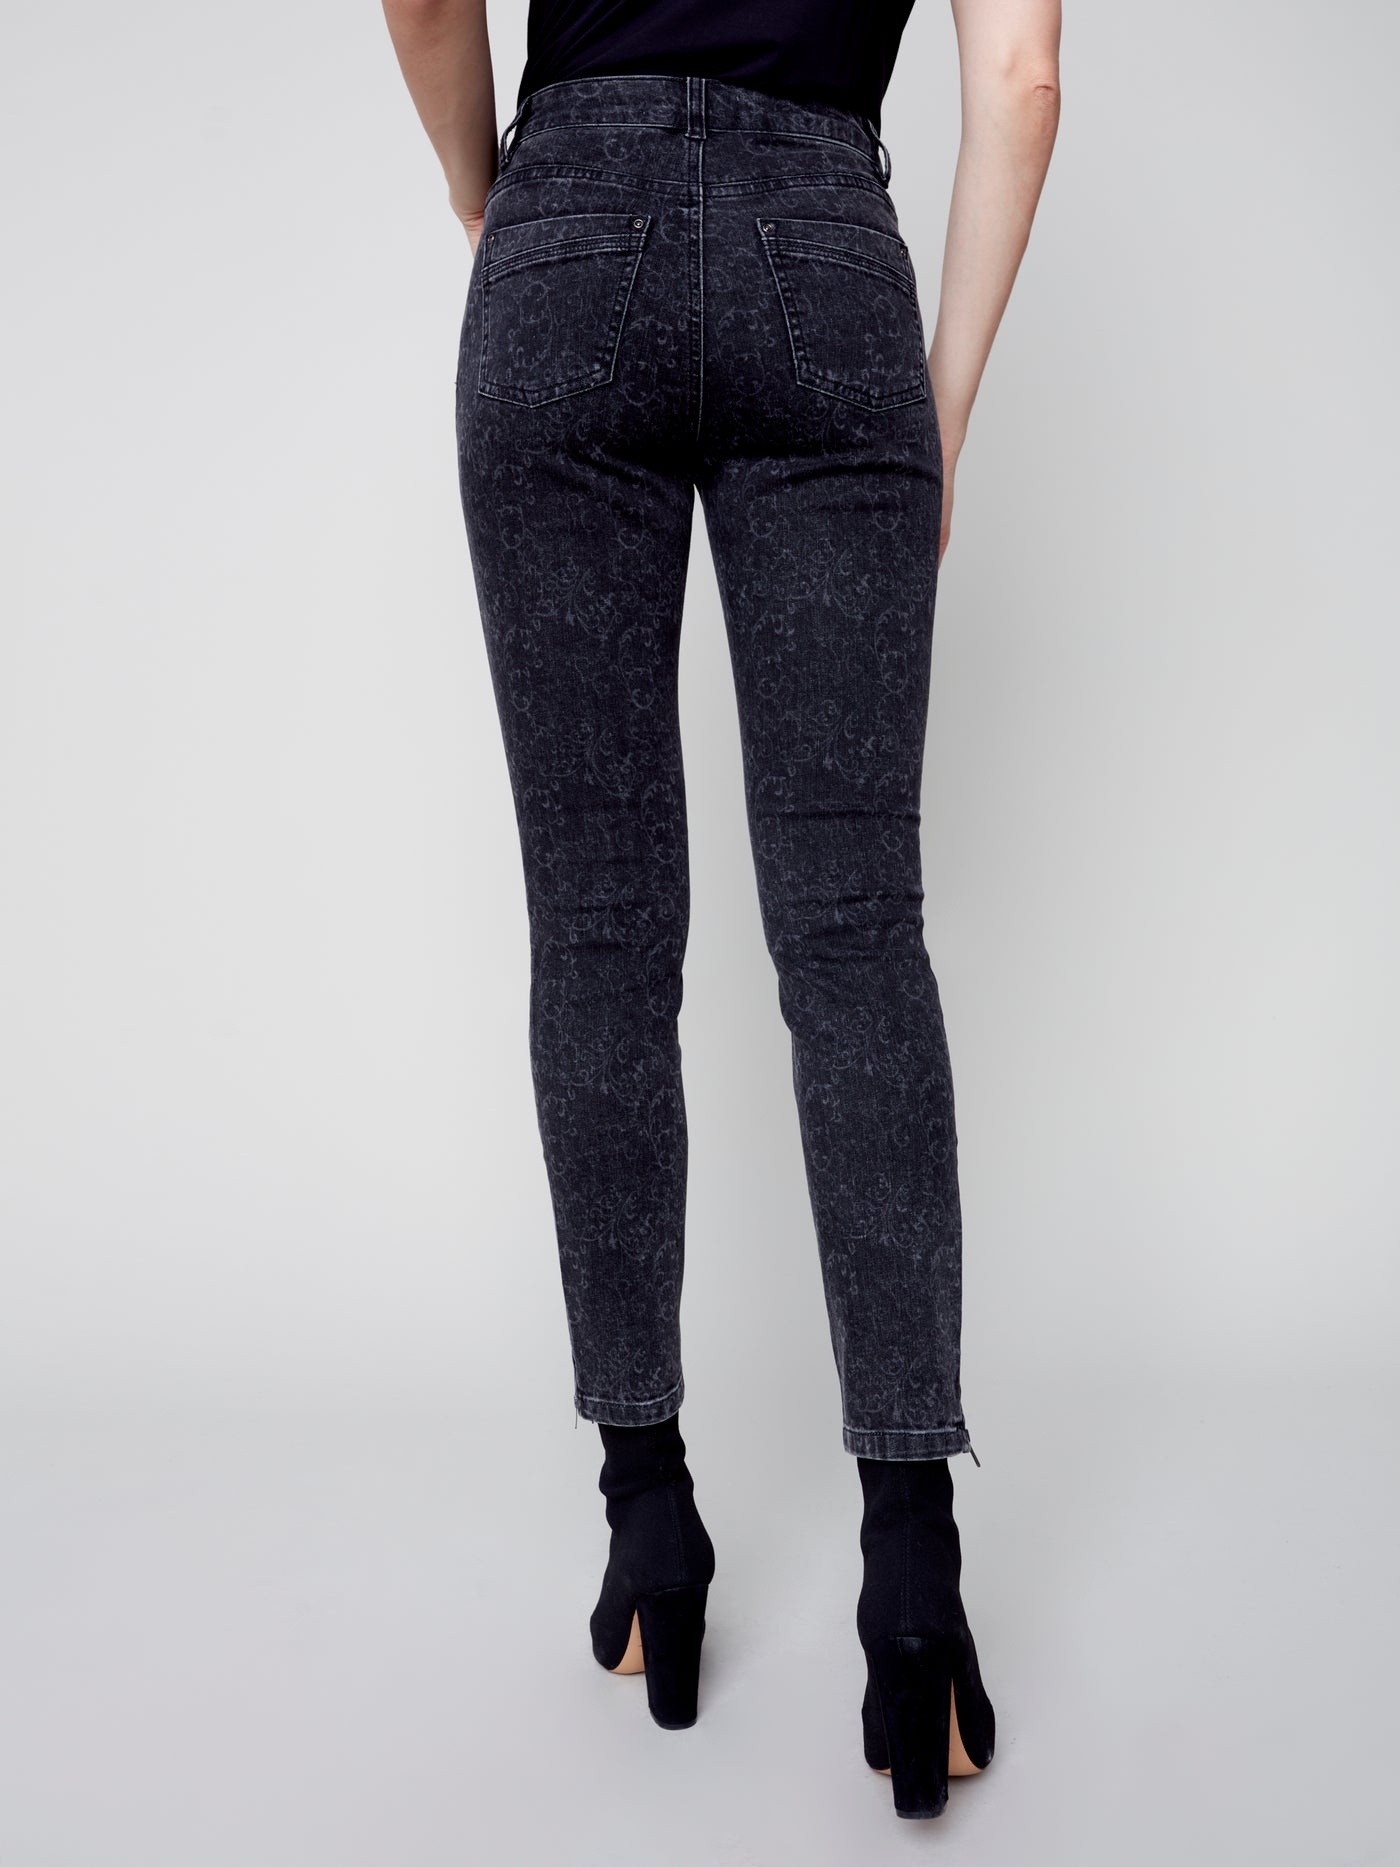 Charcoal Side Zip Detail Pant